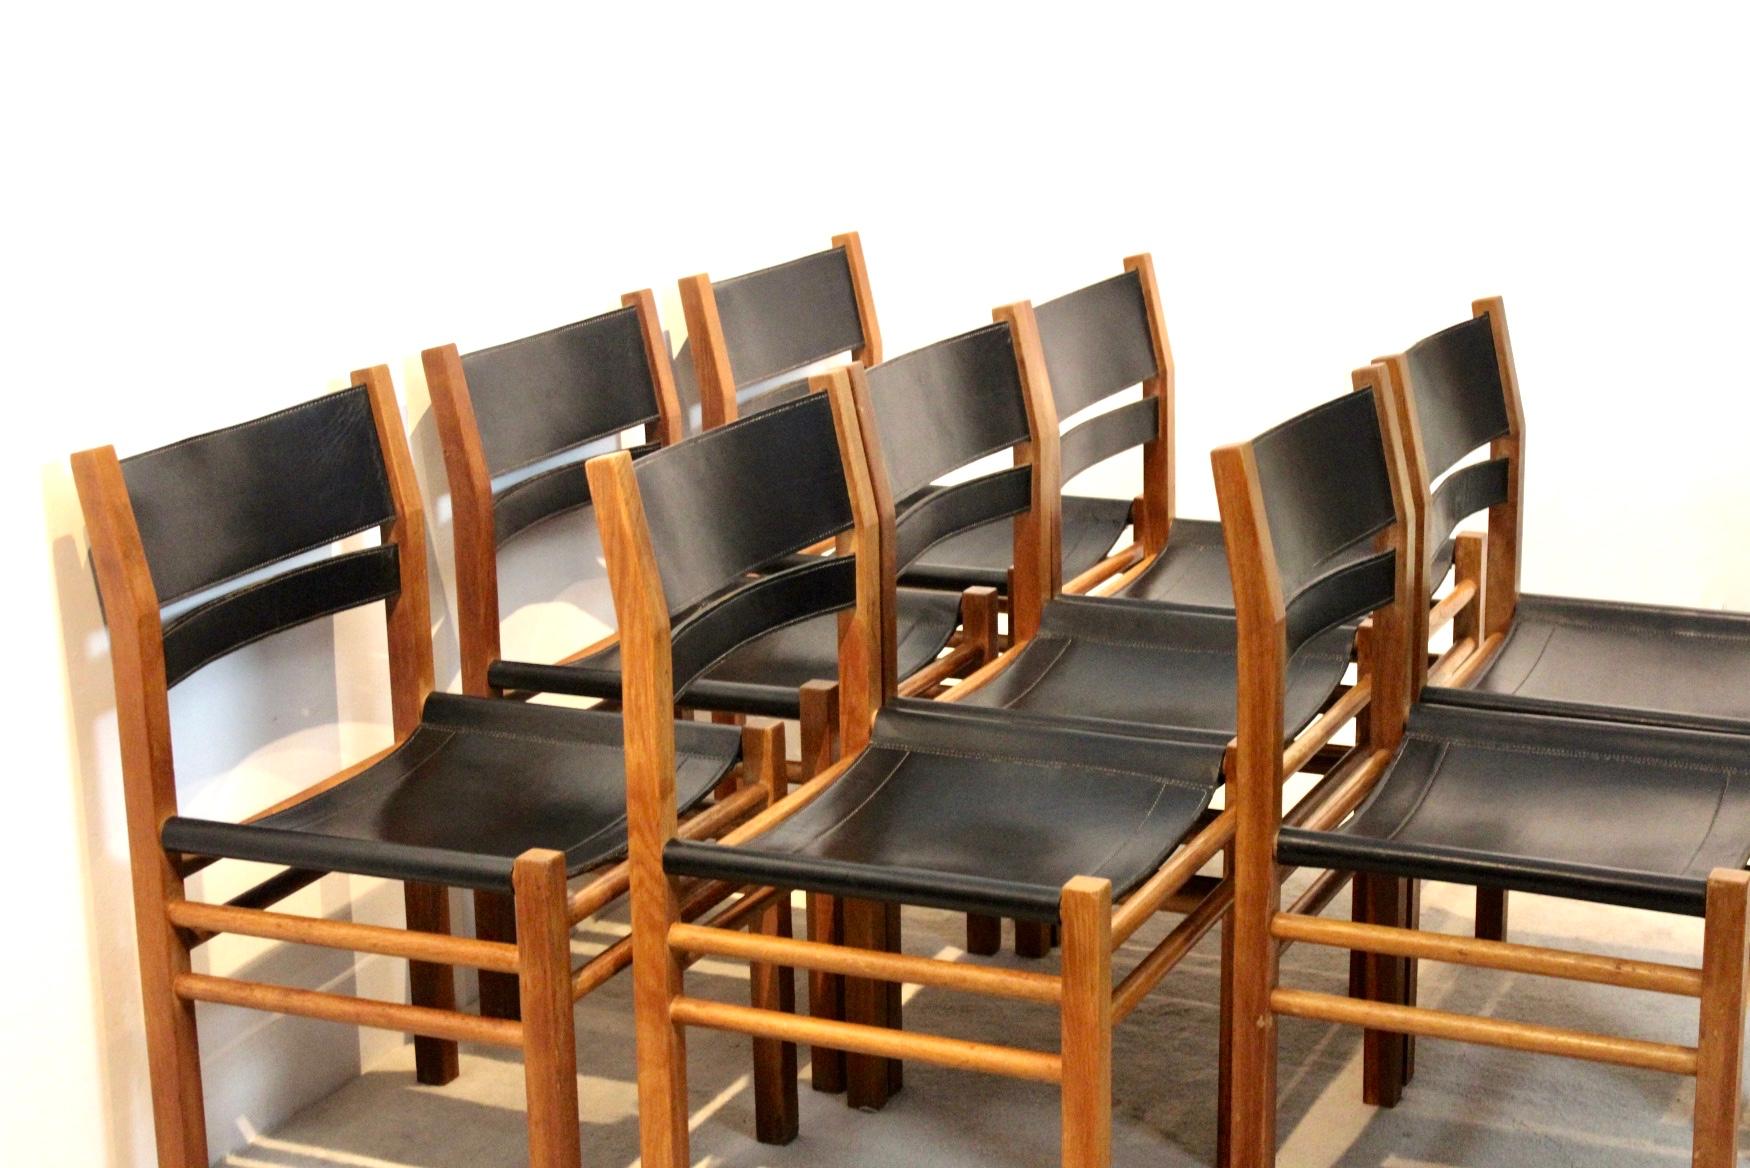 Set of 8 unique Scandinavian chairs. With a solid honey colored oak base and a strong black saddle leather seat and backrest. The chairs are completely made of wood with the use of unique craftsmanship without the use of screws. Very nice